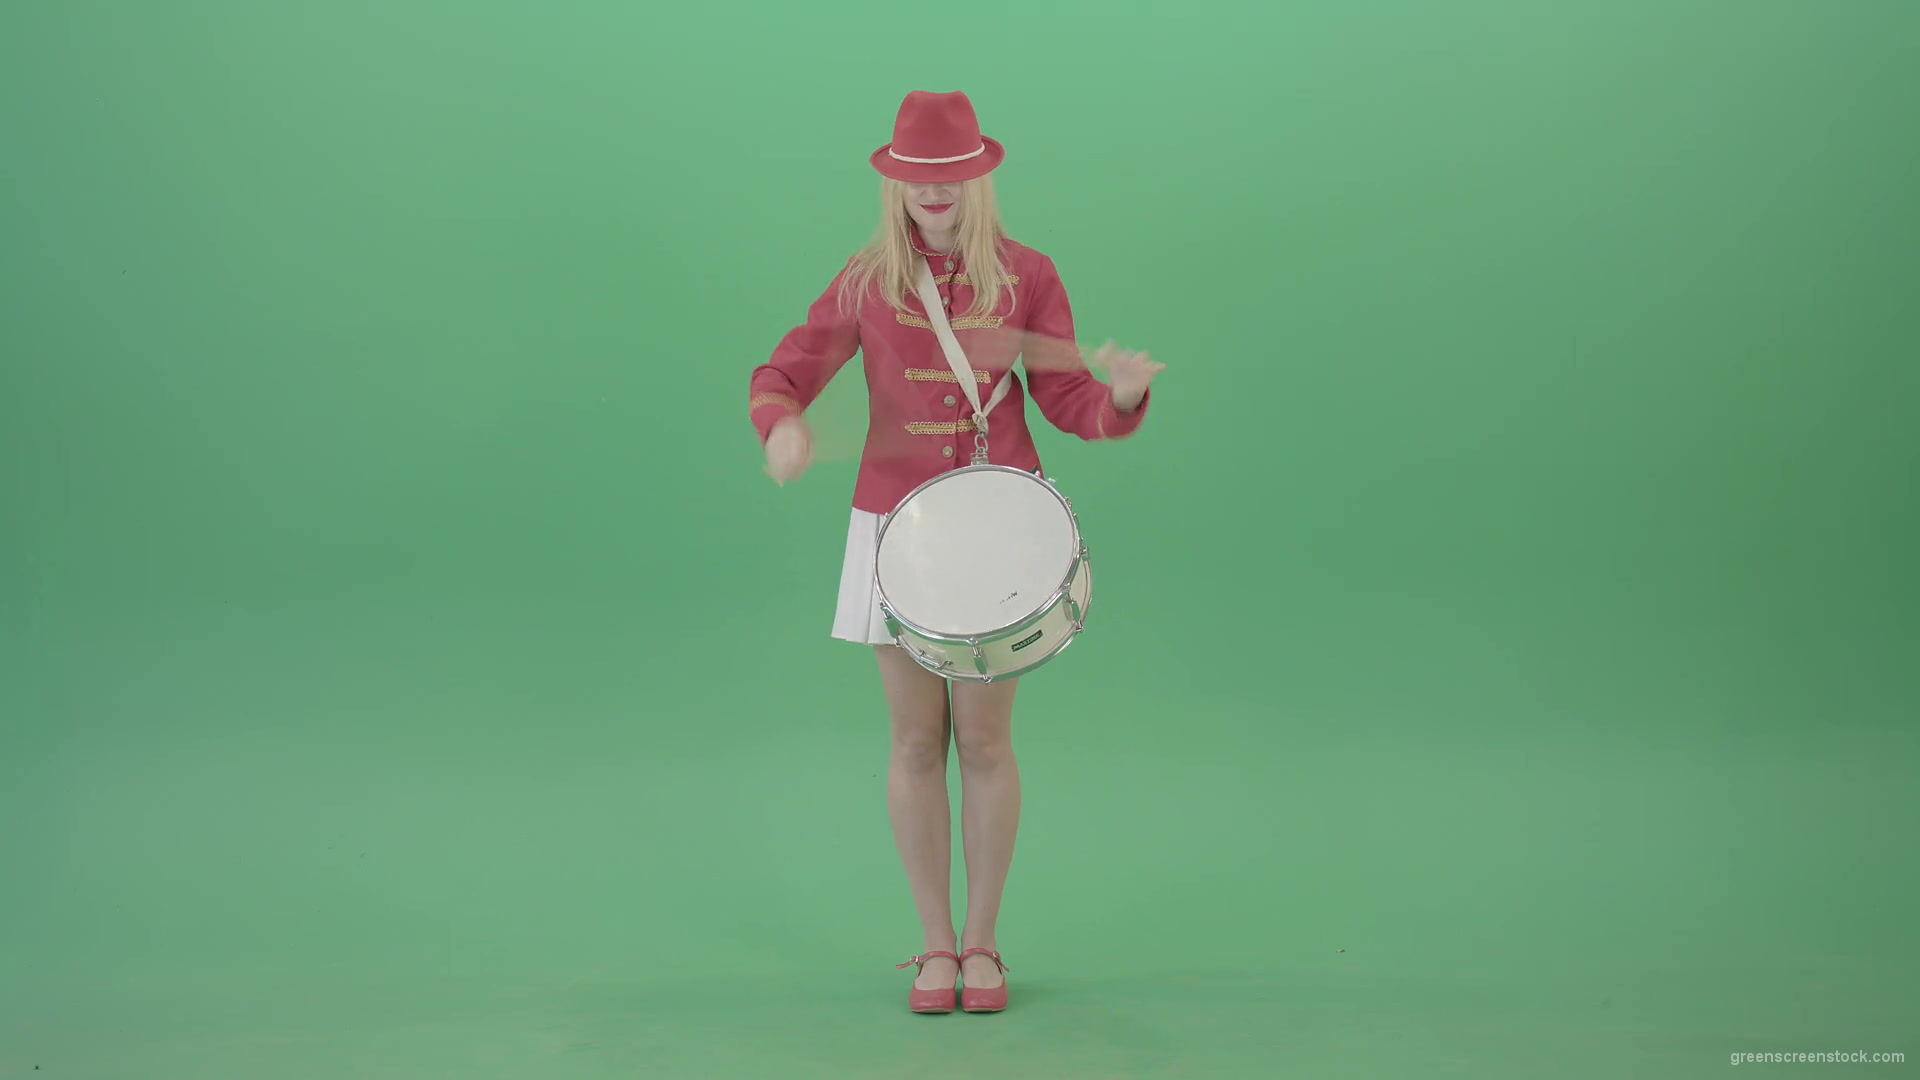 Blonde-woman-in-military-celebration-uniform-play-snare-drum-isolated-on-green-screen-4K-Video-footage-1920_005 Green Screen Stock